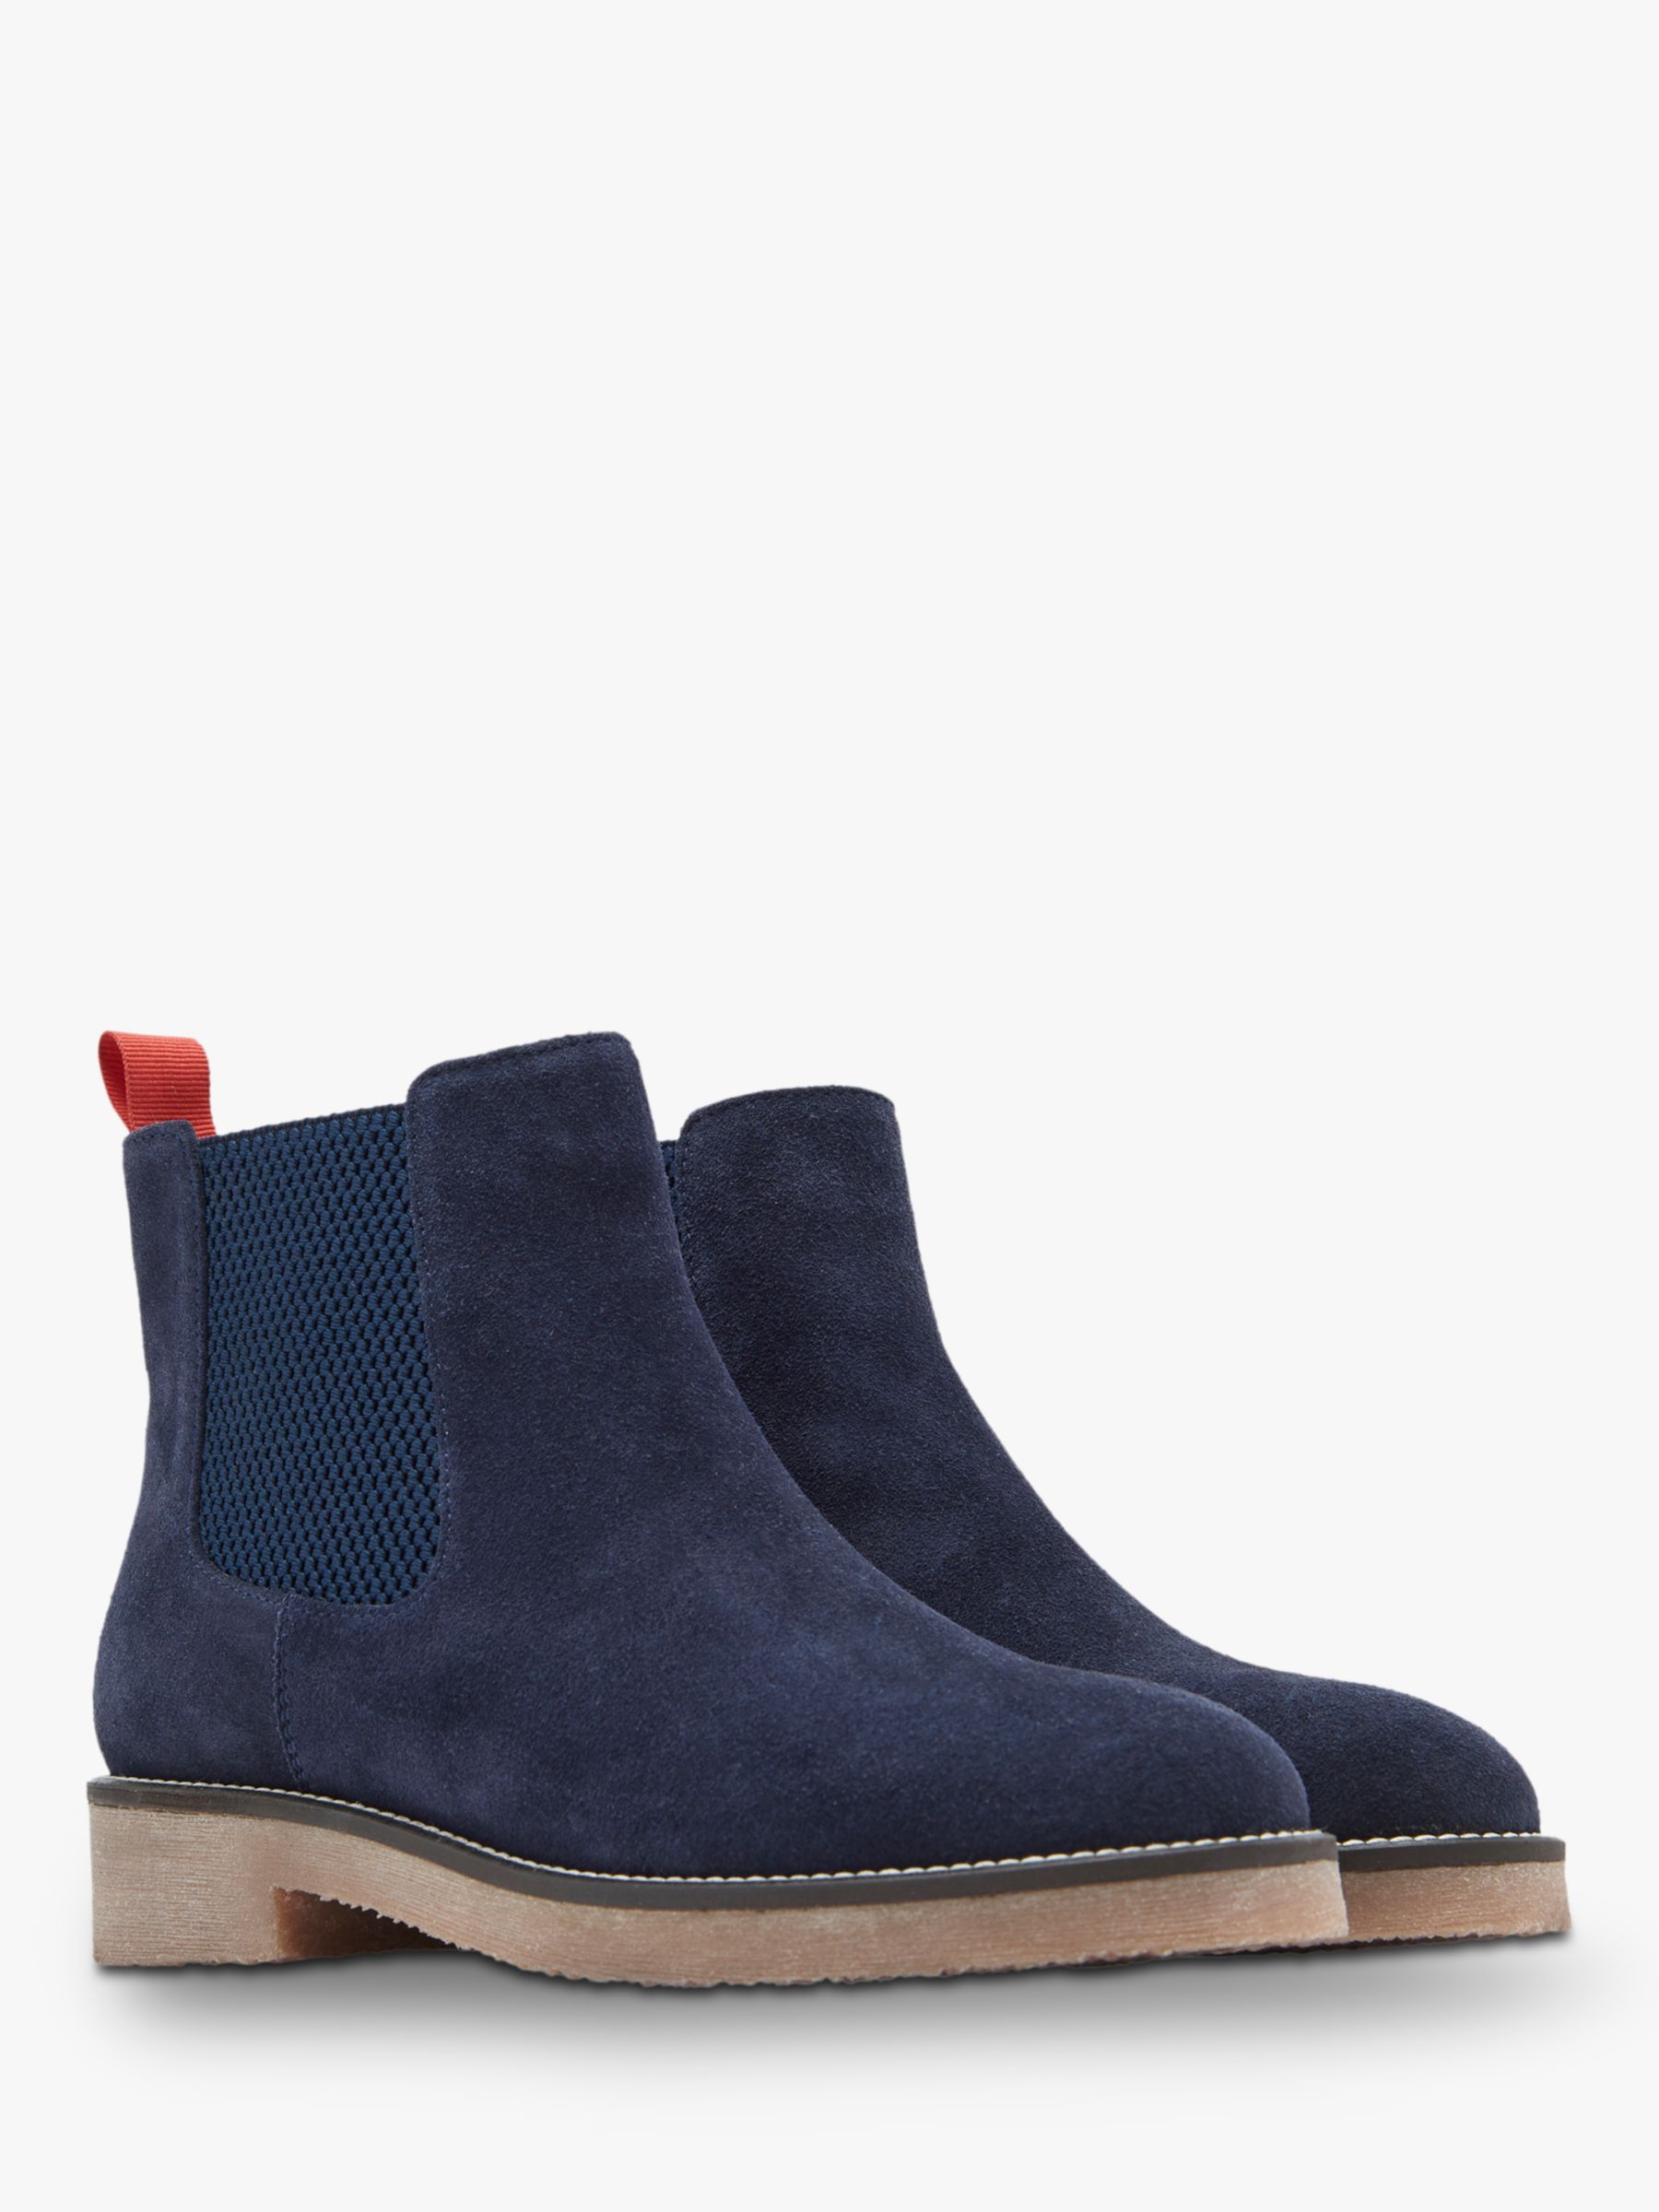 Joules Chepstow Suede Chelsea Boots, Navy at John Lewis & Partners